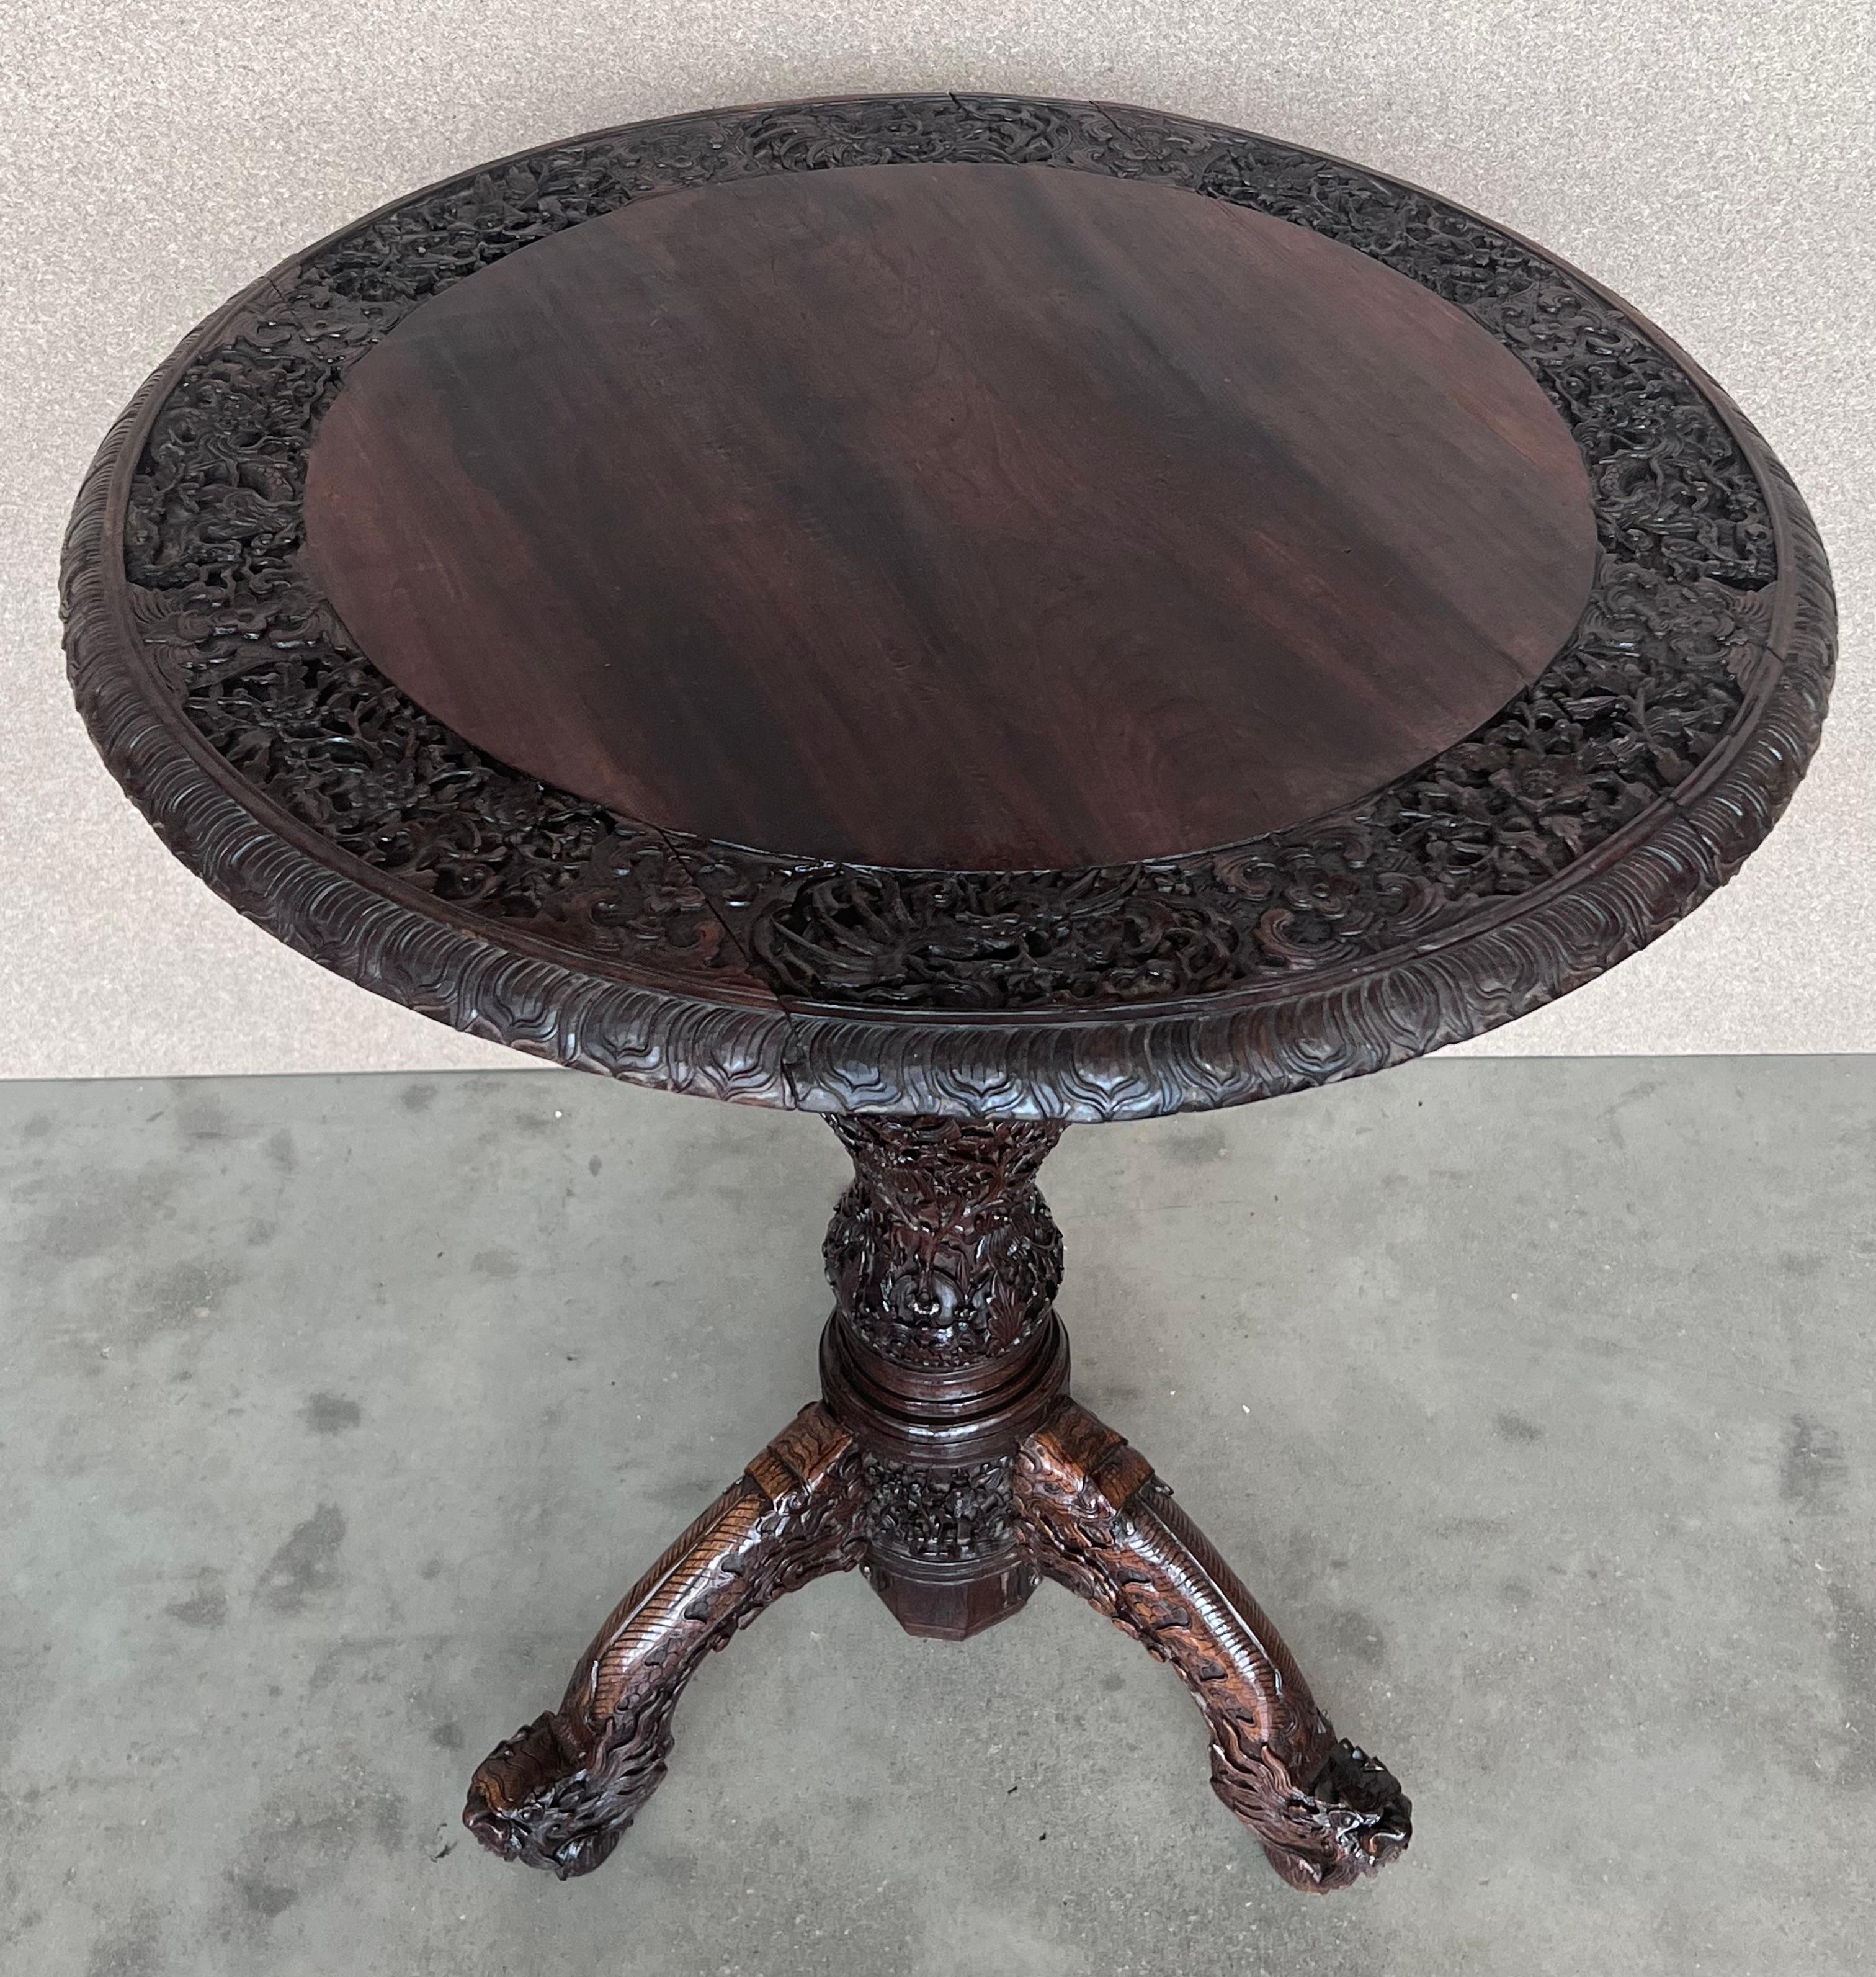 A beautiful finely carved British Colonial wooden circular side table from India or Ceylon. The circular top with a broad shallow relief detailed border depicting a lion and serpent amidst a dense tropical forest interspersed with exotic birds and